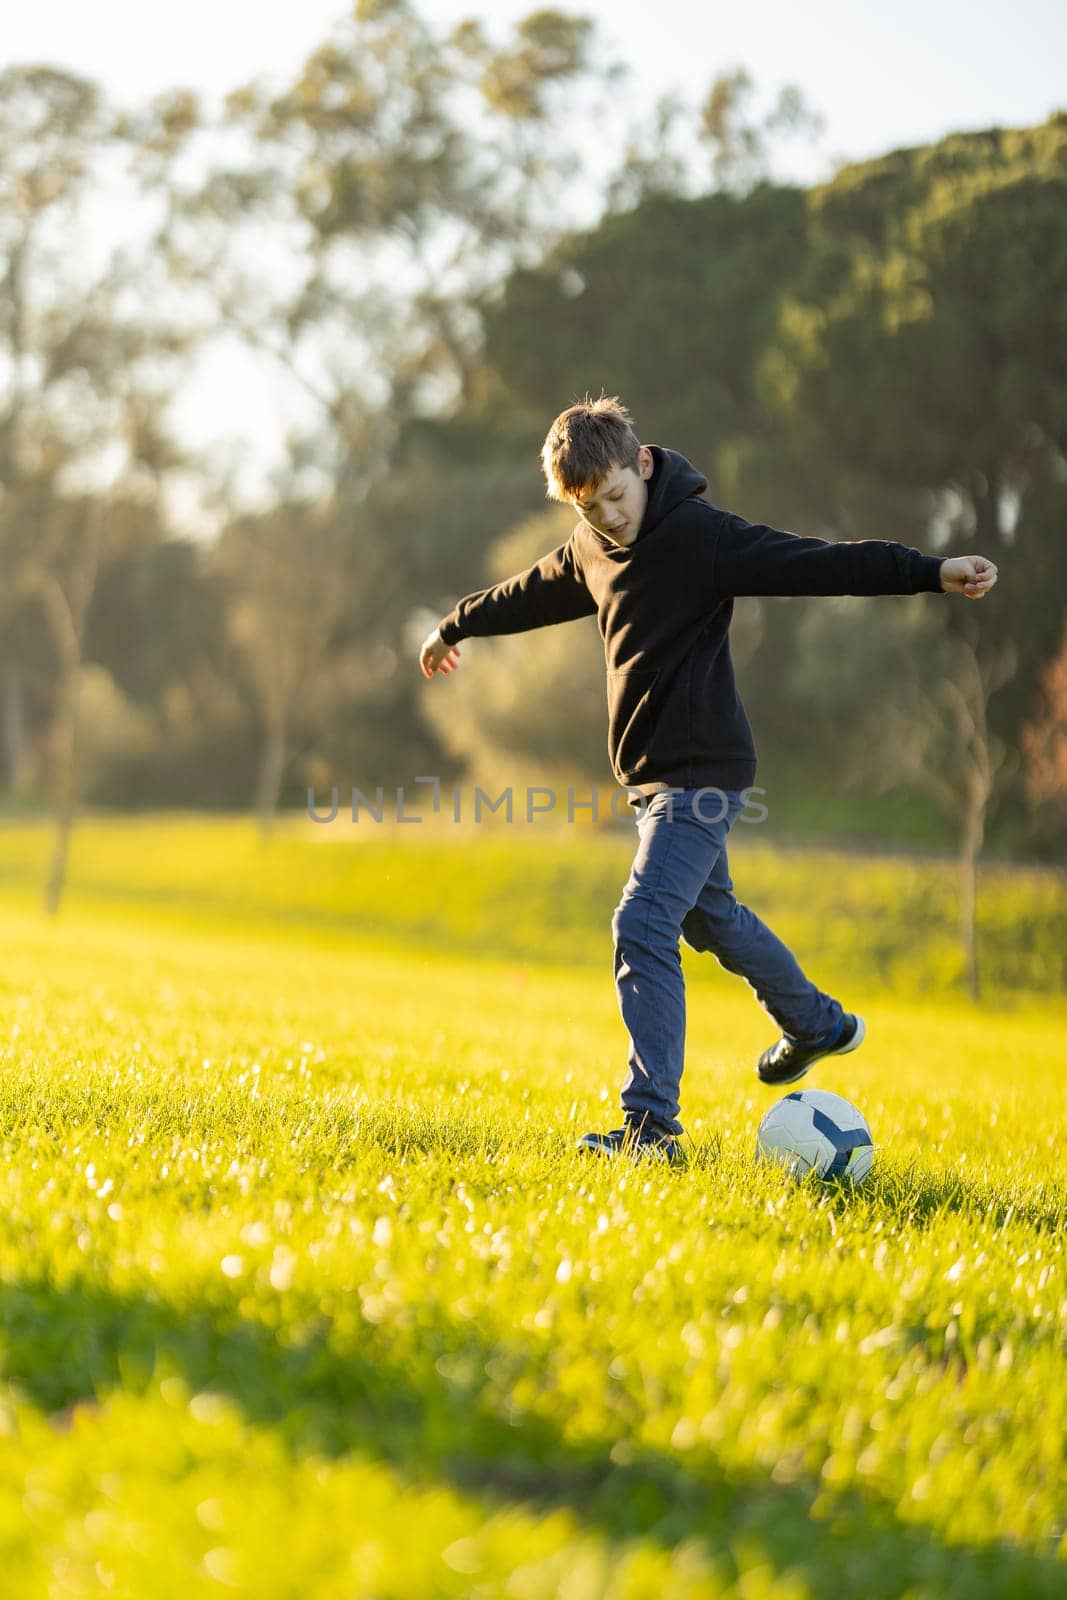 A boy is playing soccer in a field. He is wearing a black hoodie and gray pants